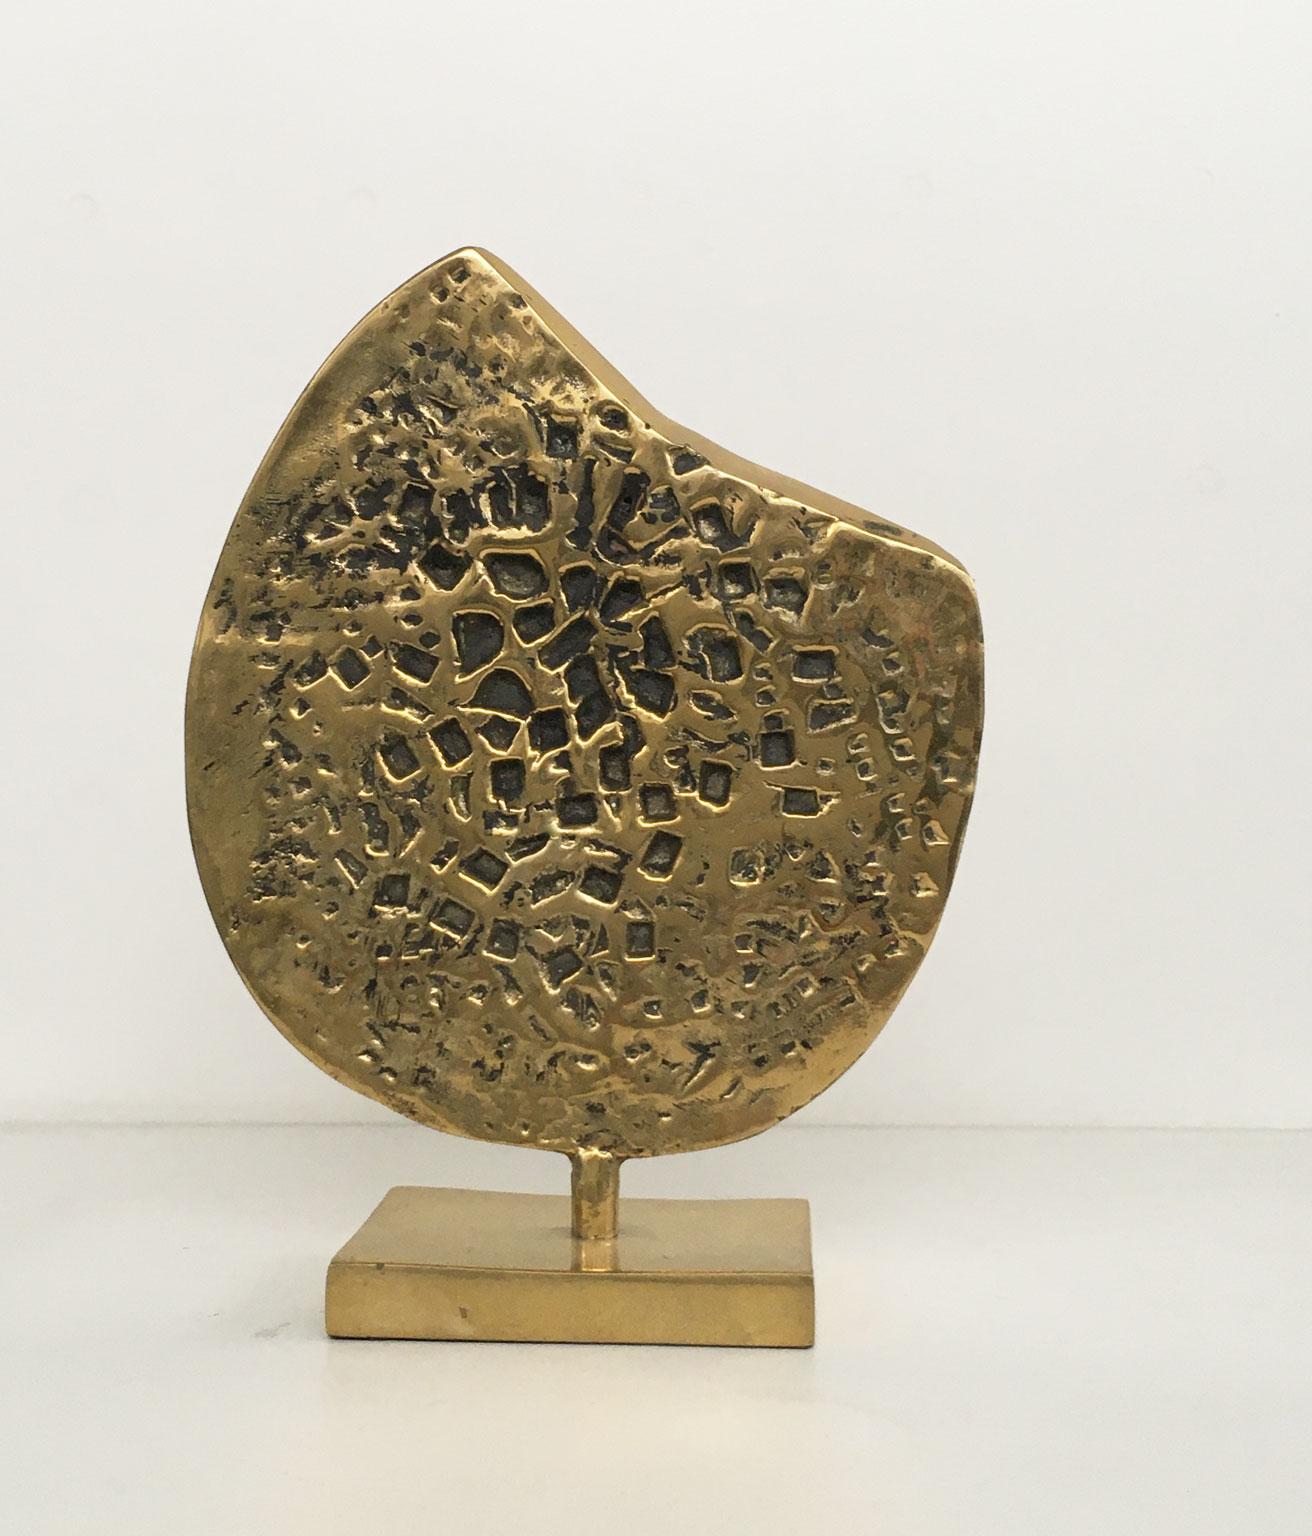 1980 Italy Bronze Abstract Sculpture by Lino Tiné Albero Città City Tree For Sale 12